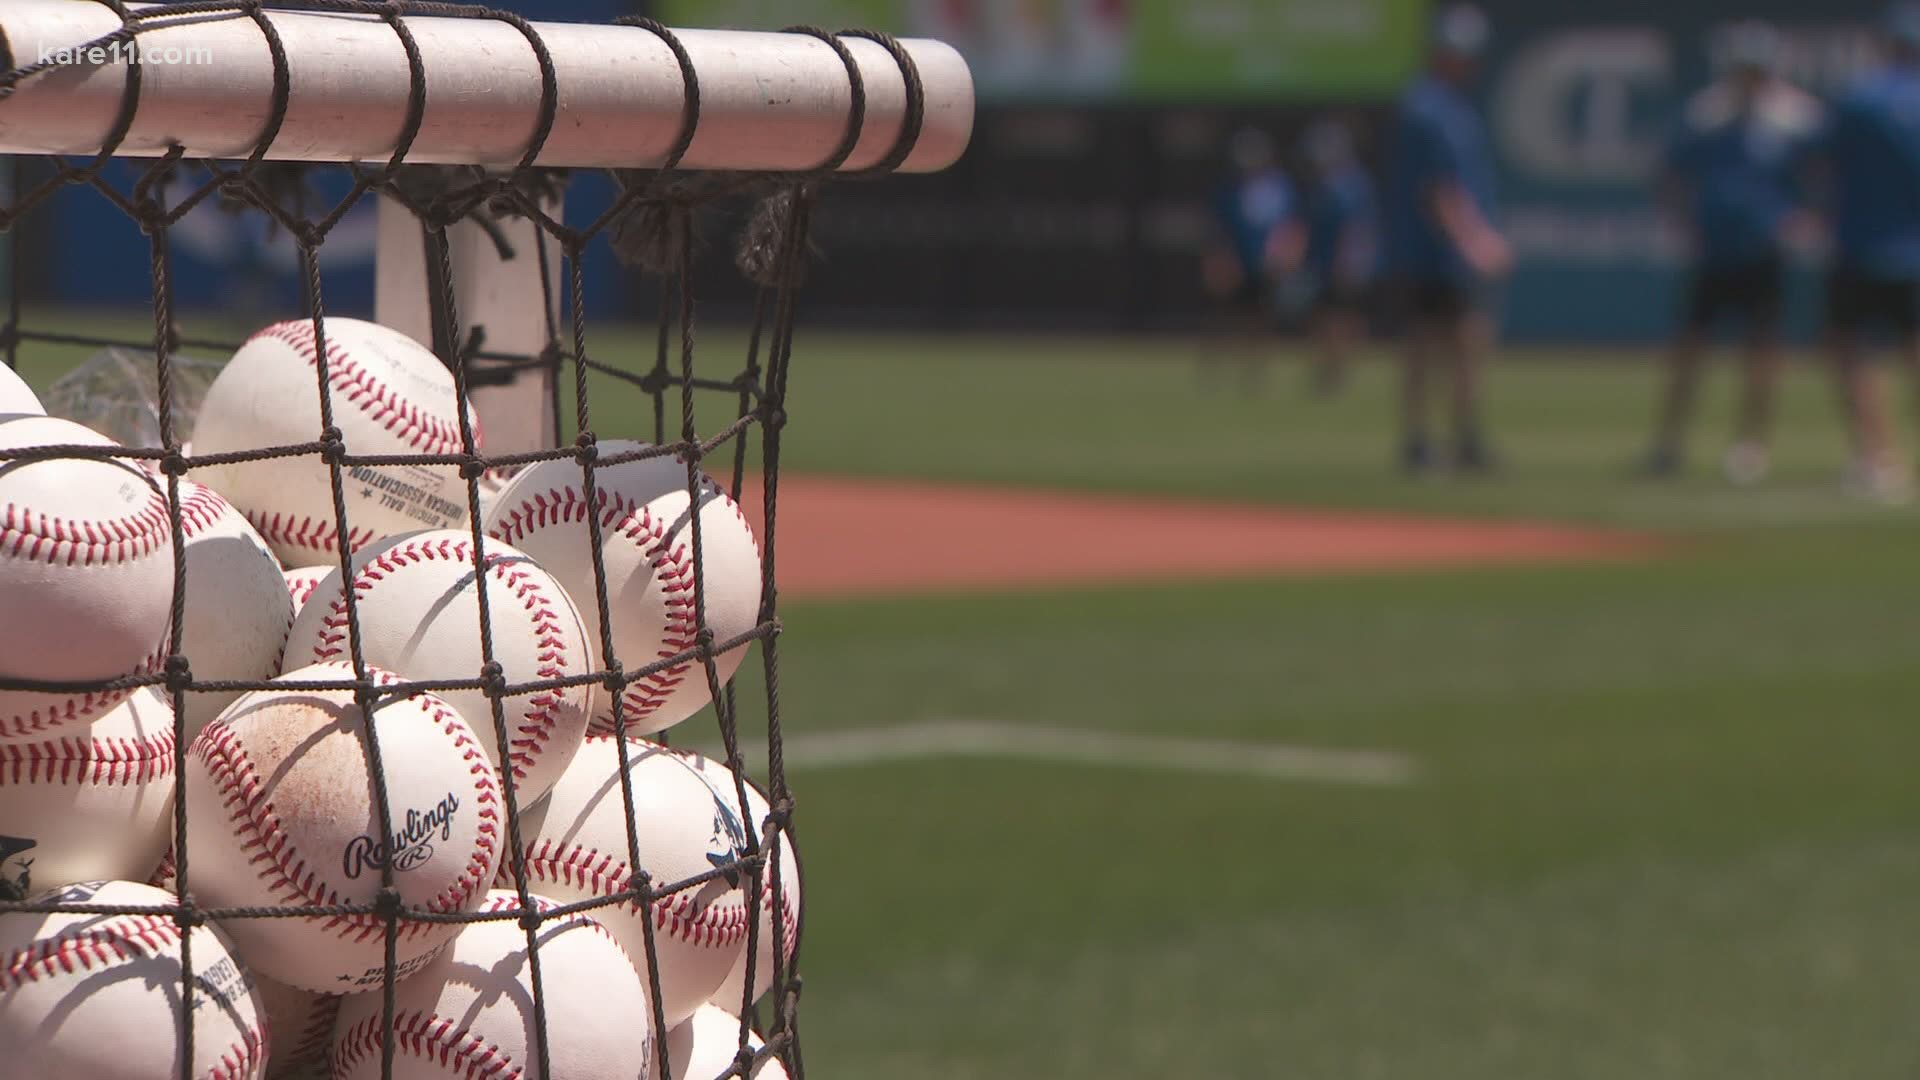 The St. Paul Saints are one of the first in the country to welcome fans to the stands